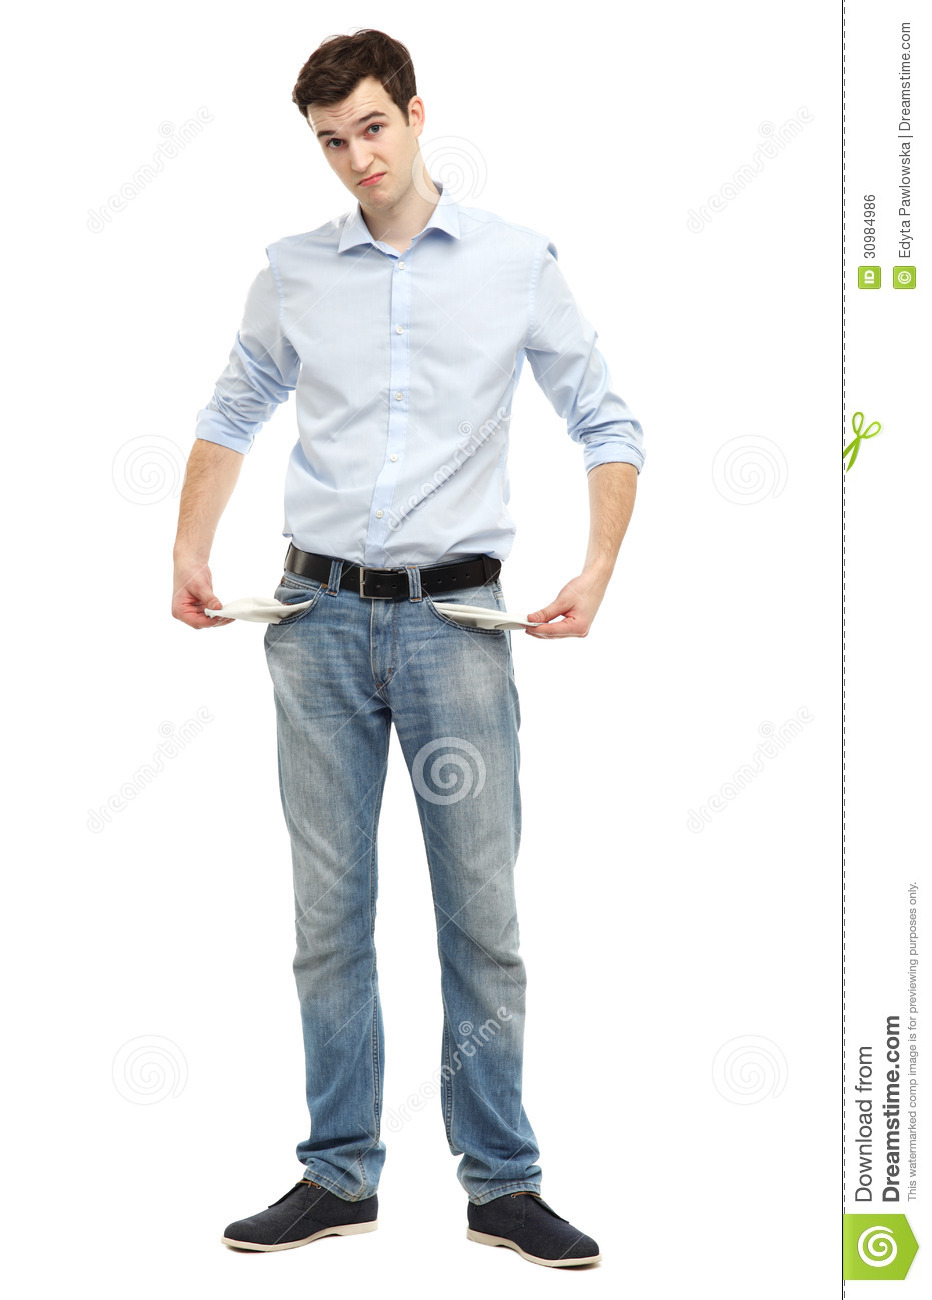 Man Showing Empty Pockets Royalty Free Stock Image   Image  30984986